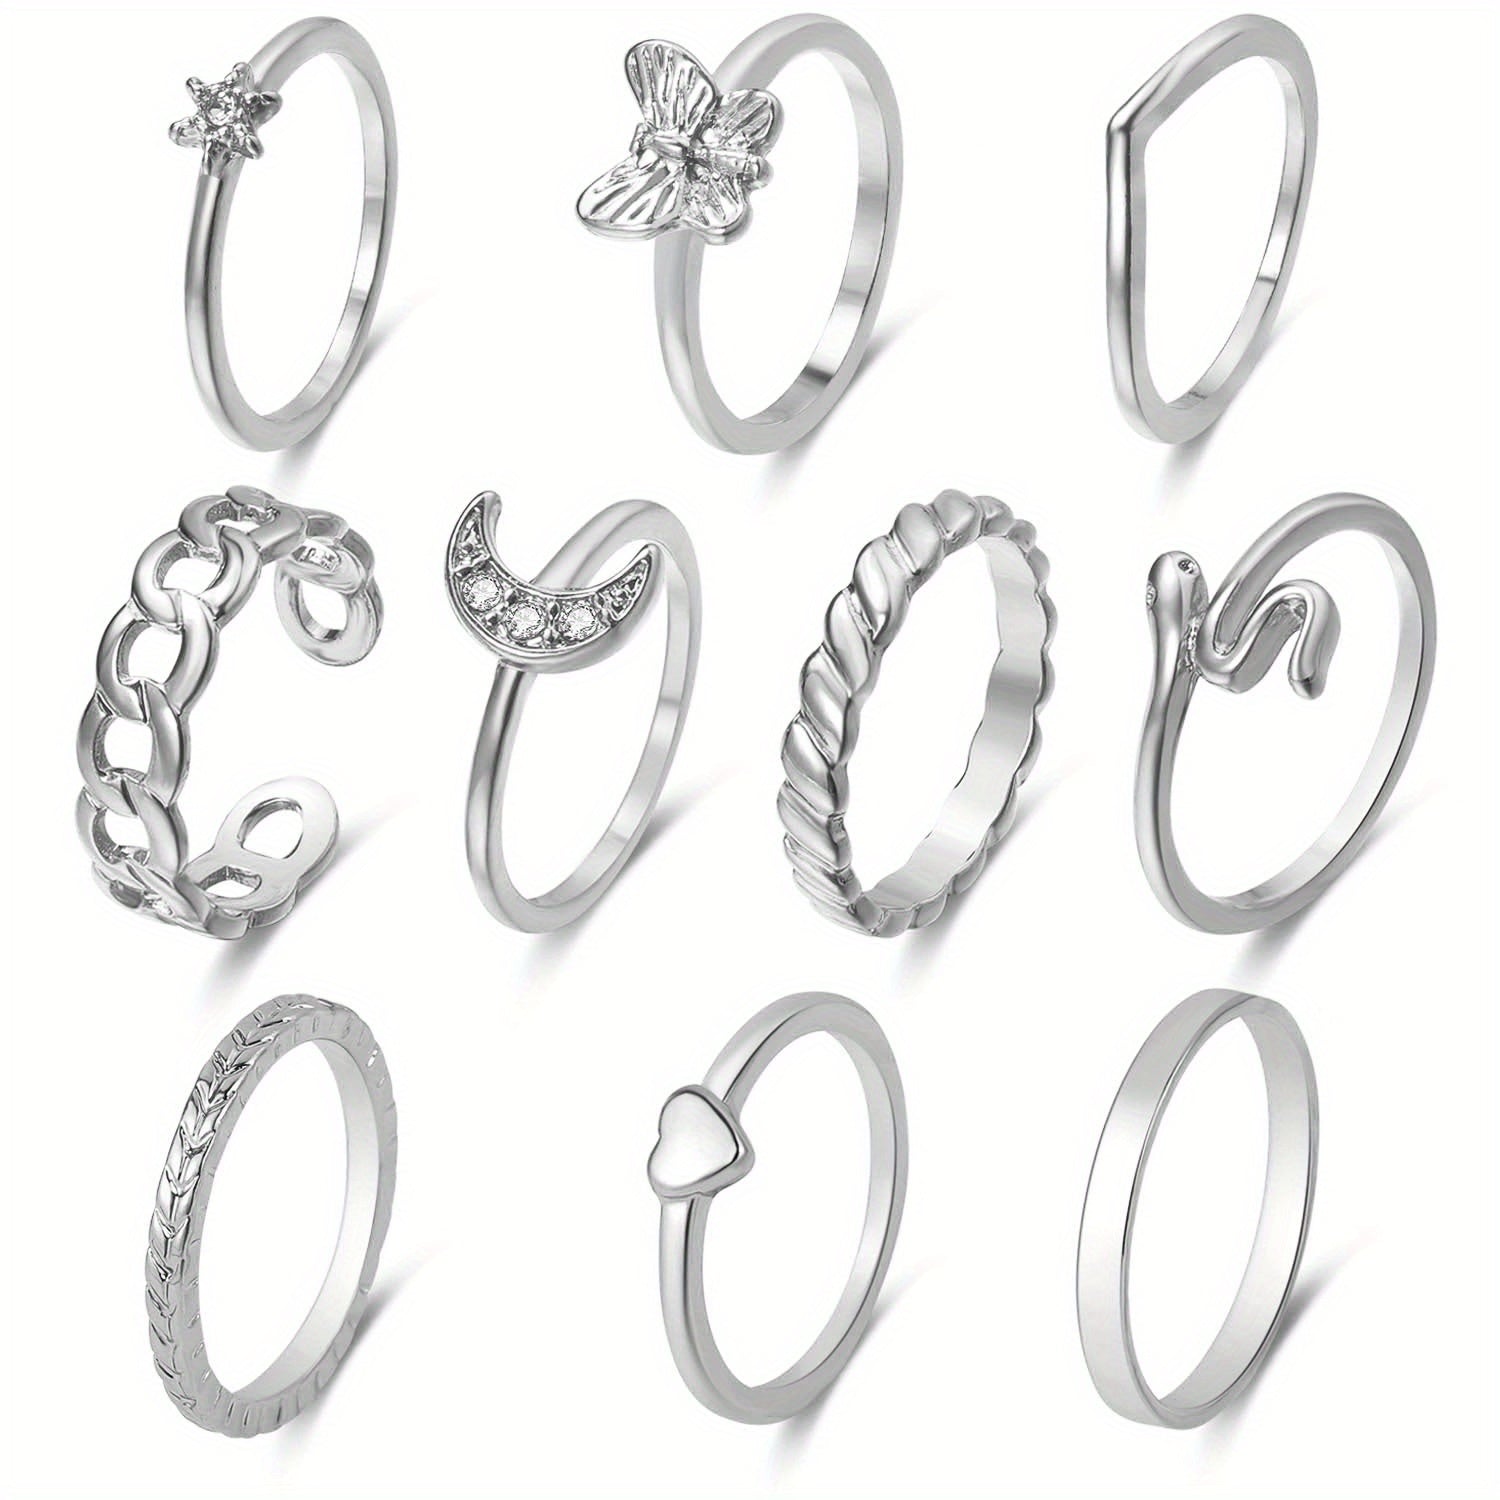 10pcs Vintage Style Stacking Rings Trendy Butterfly Snake Chain Heart Shape Zinc Alloy Mix And Match For Daily Outfits Party Accessories